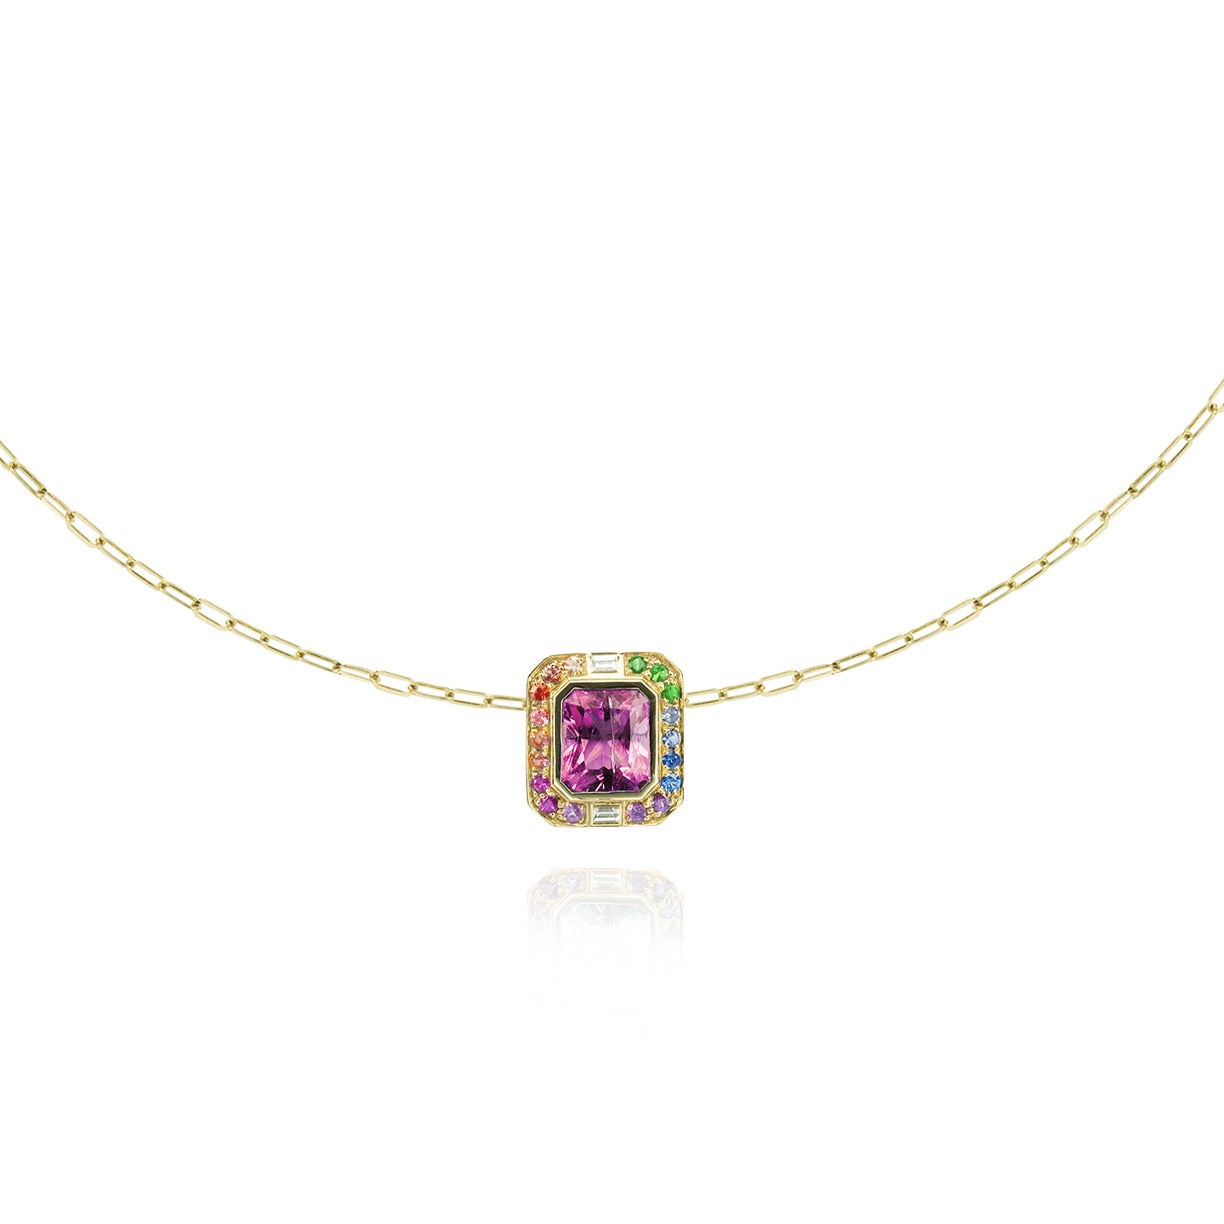 Margareth necklace special 18 carat gold, tourmaline, rainbow sapphire and zircons.